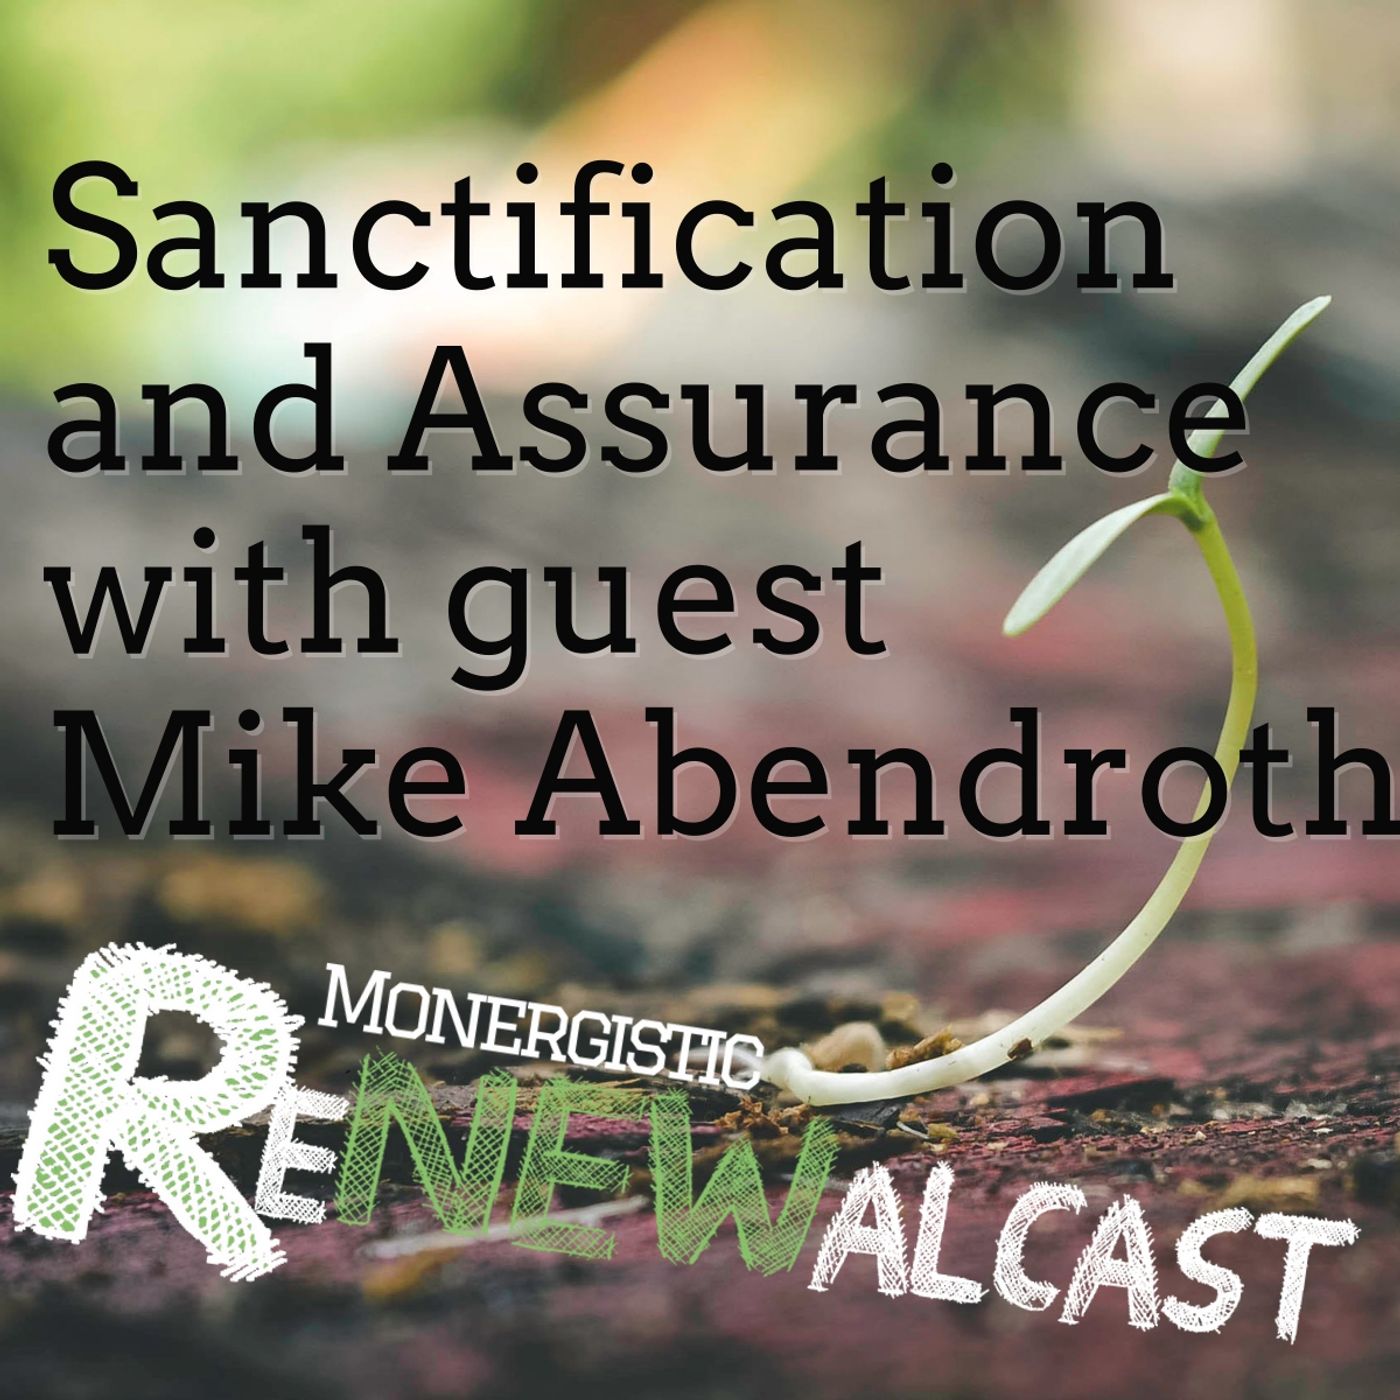 Sanctification and Assurance with guest Mike Abendroth